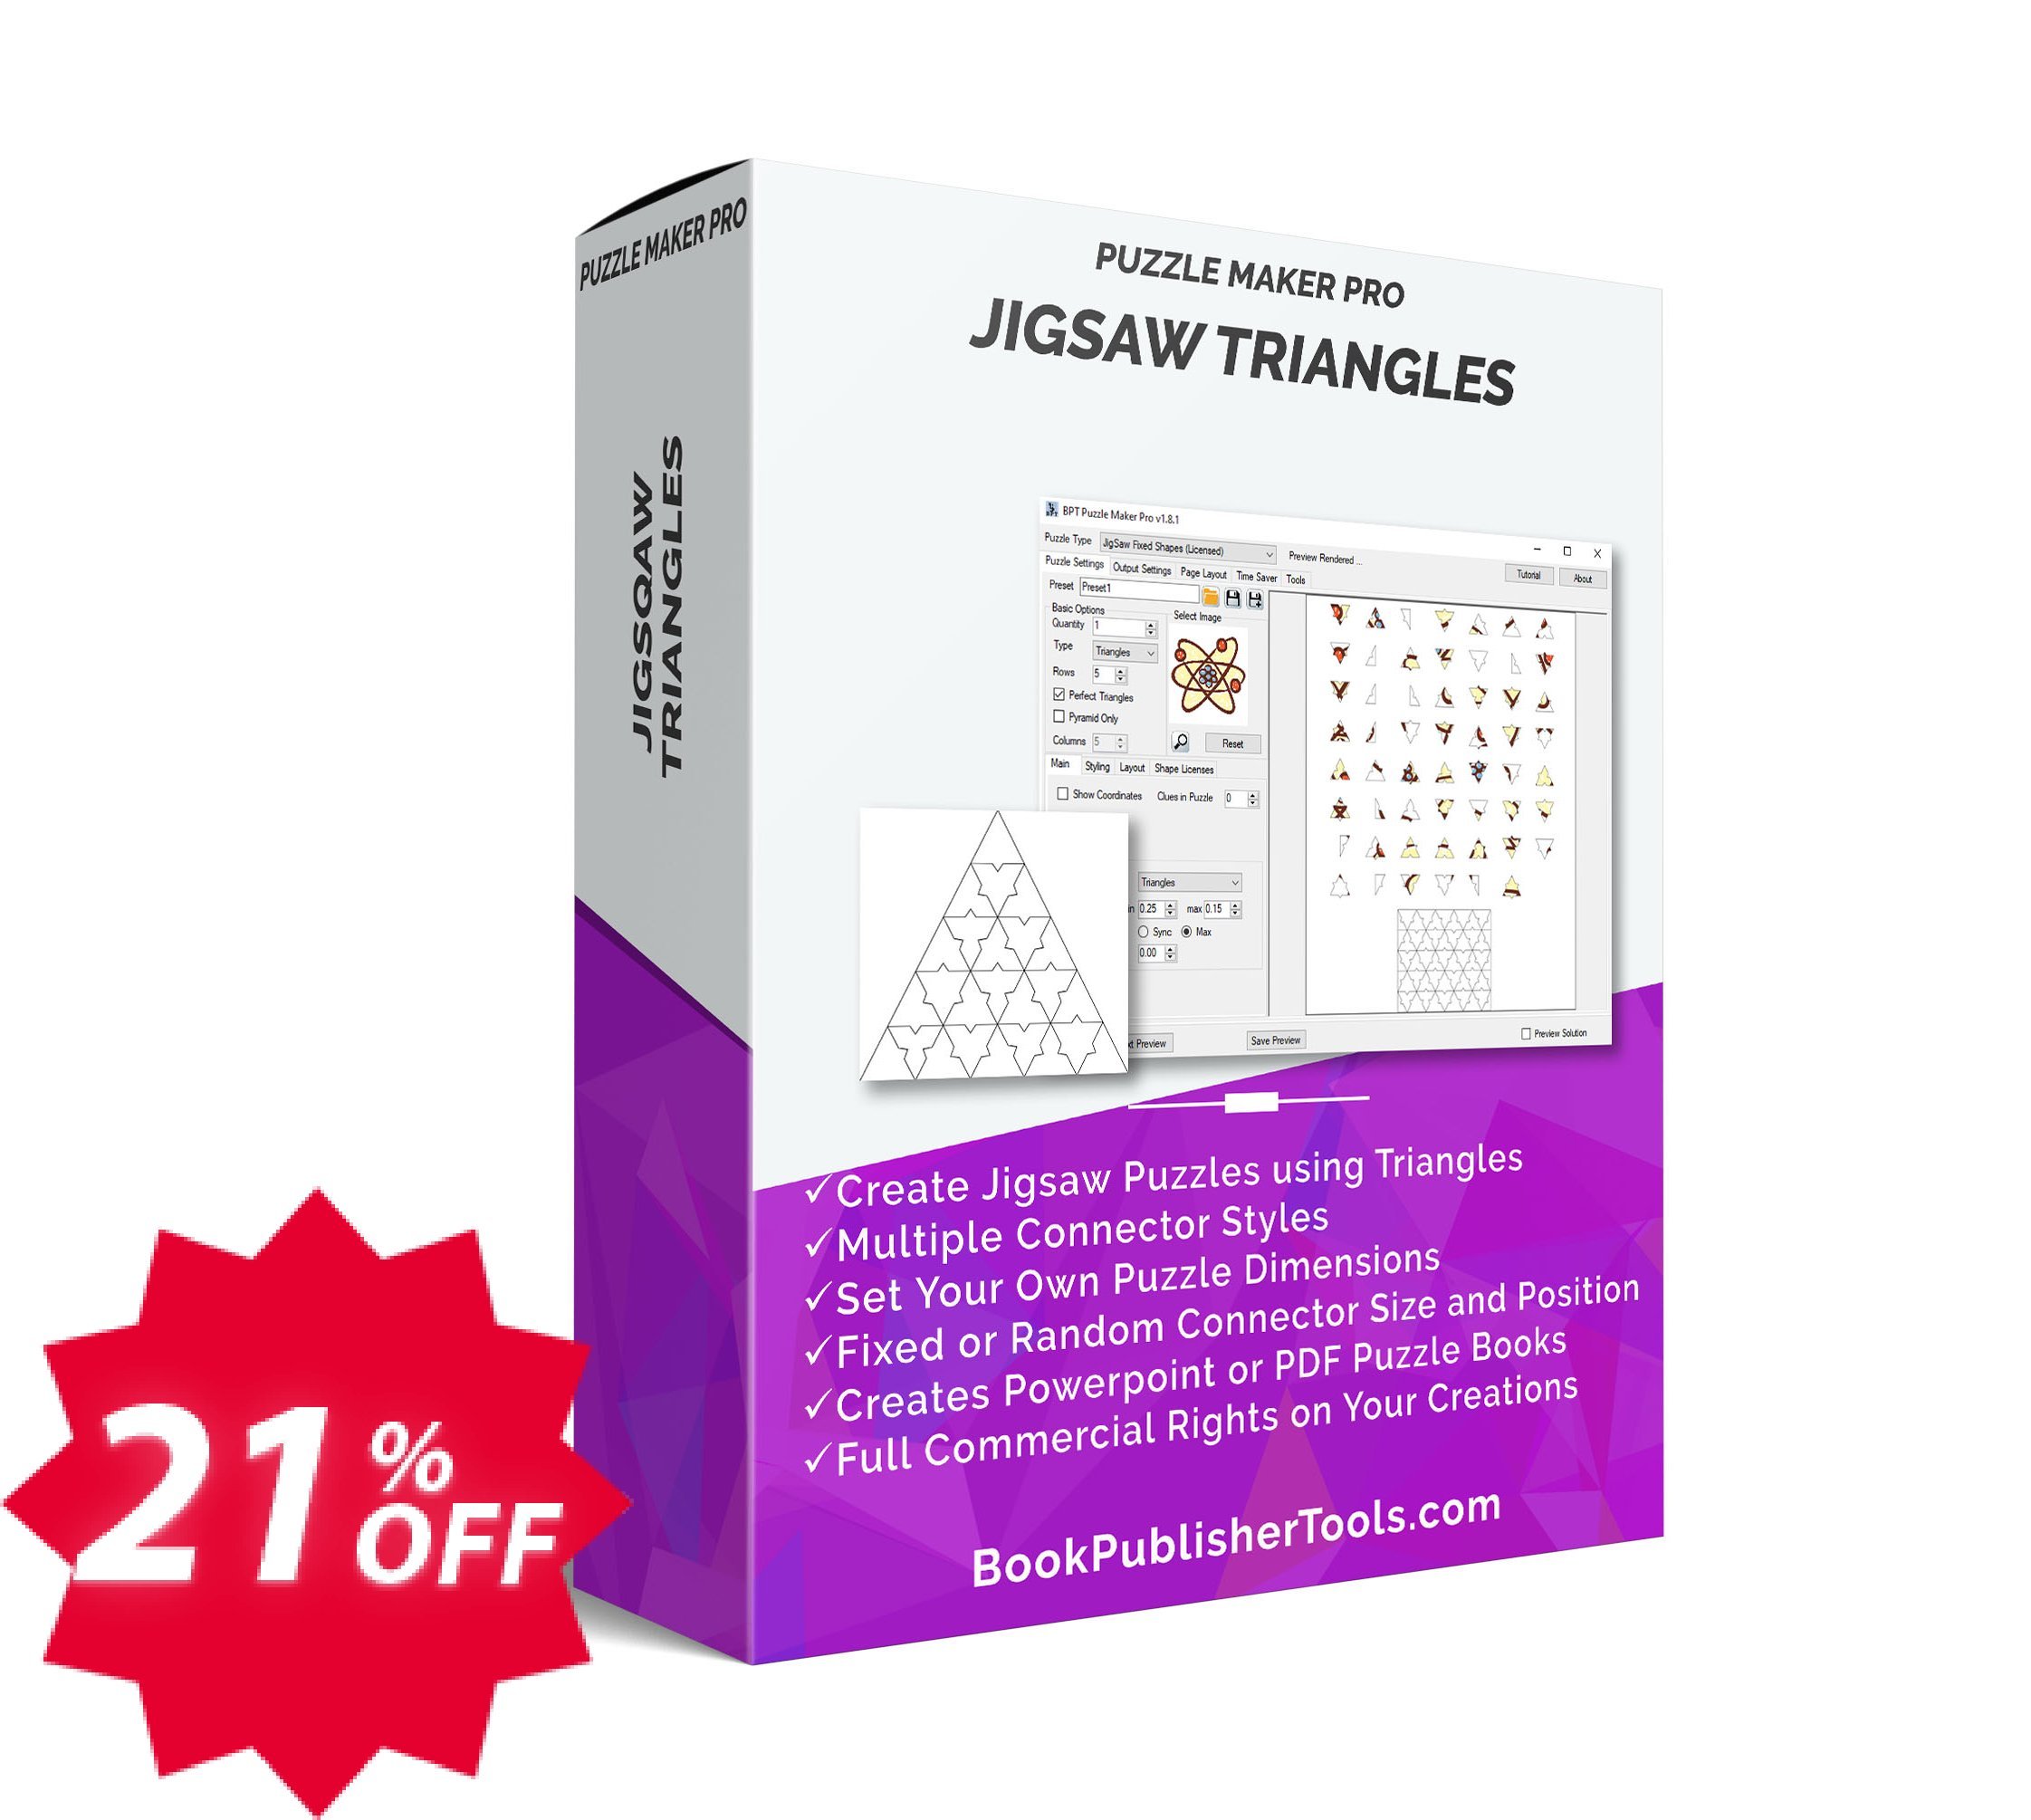 Puzzle Maker Pro - JigSaw Triangles Coupon code 21% discount 